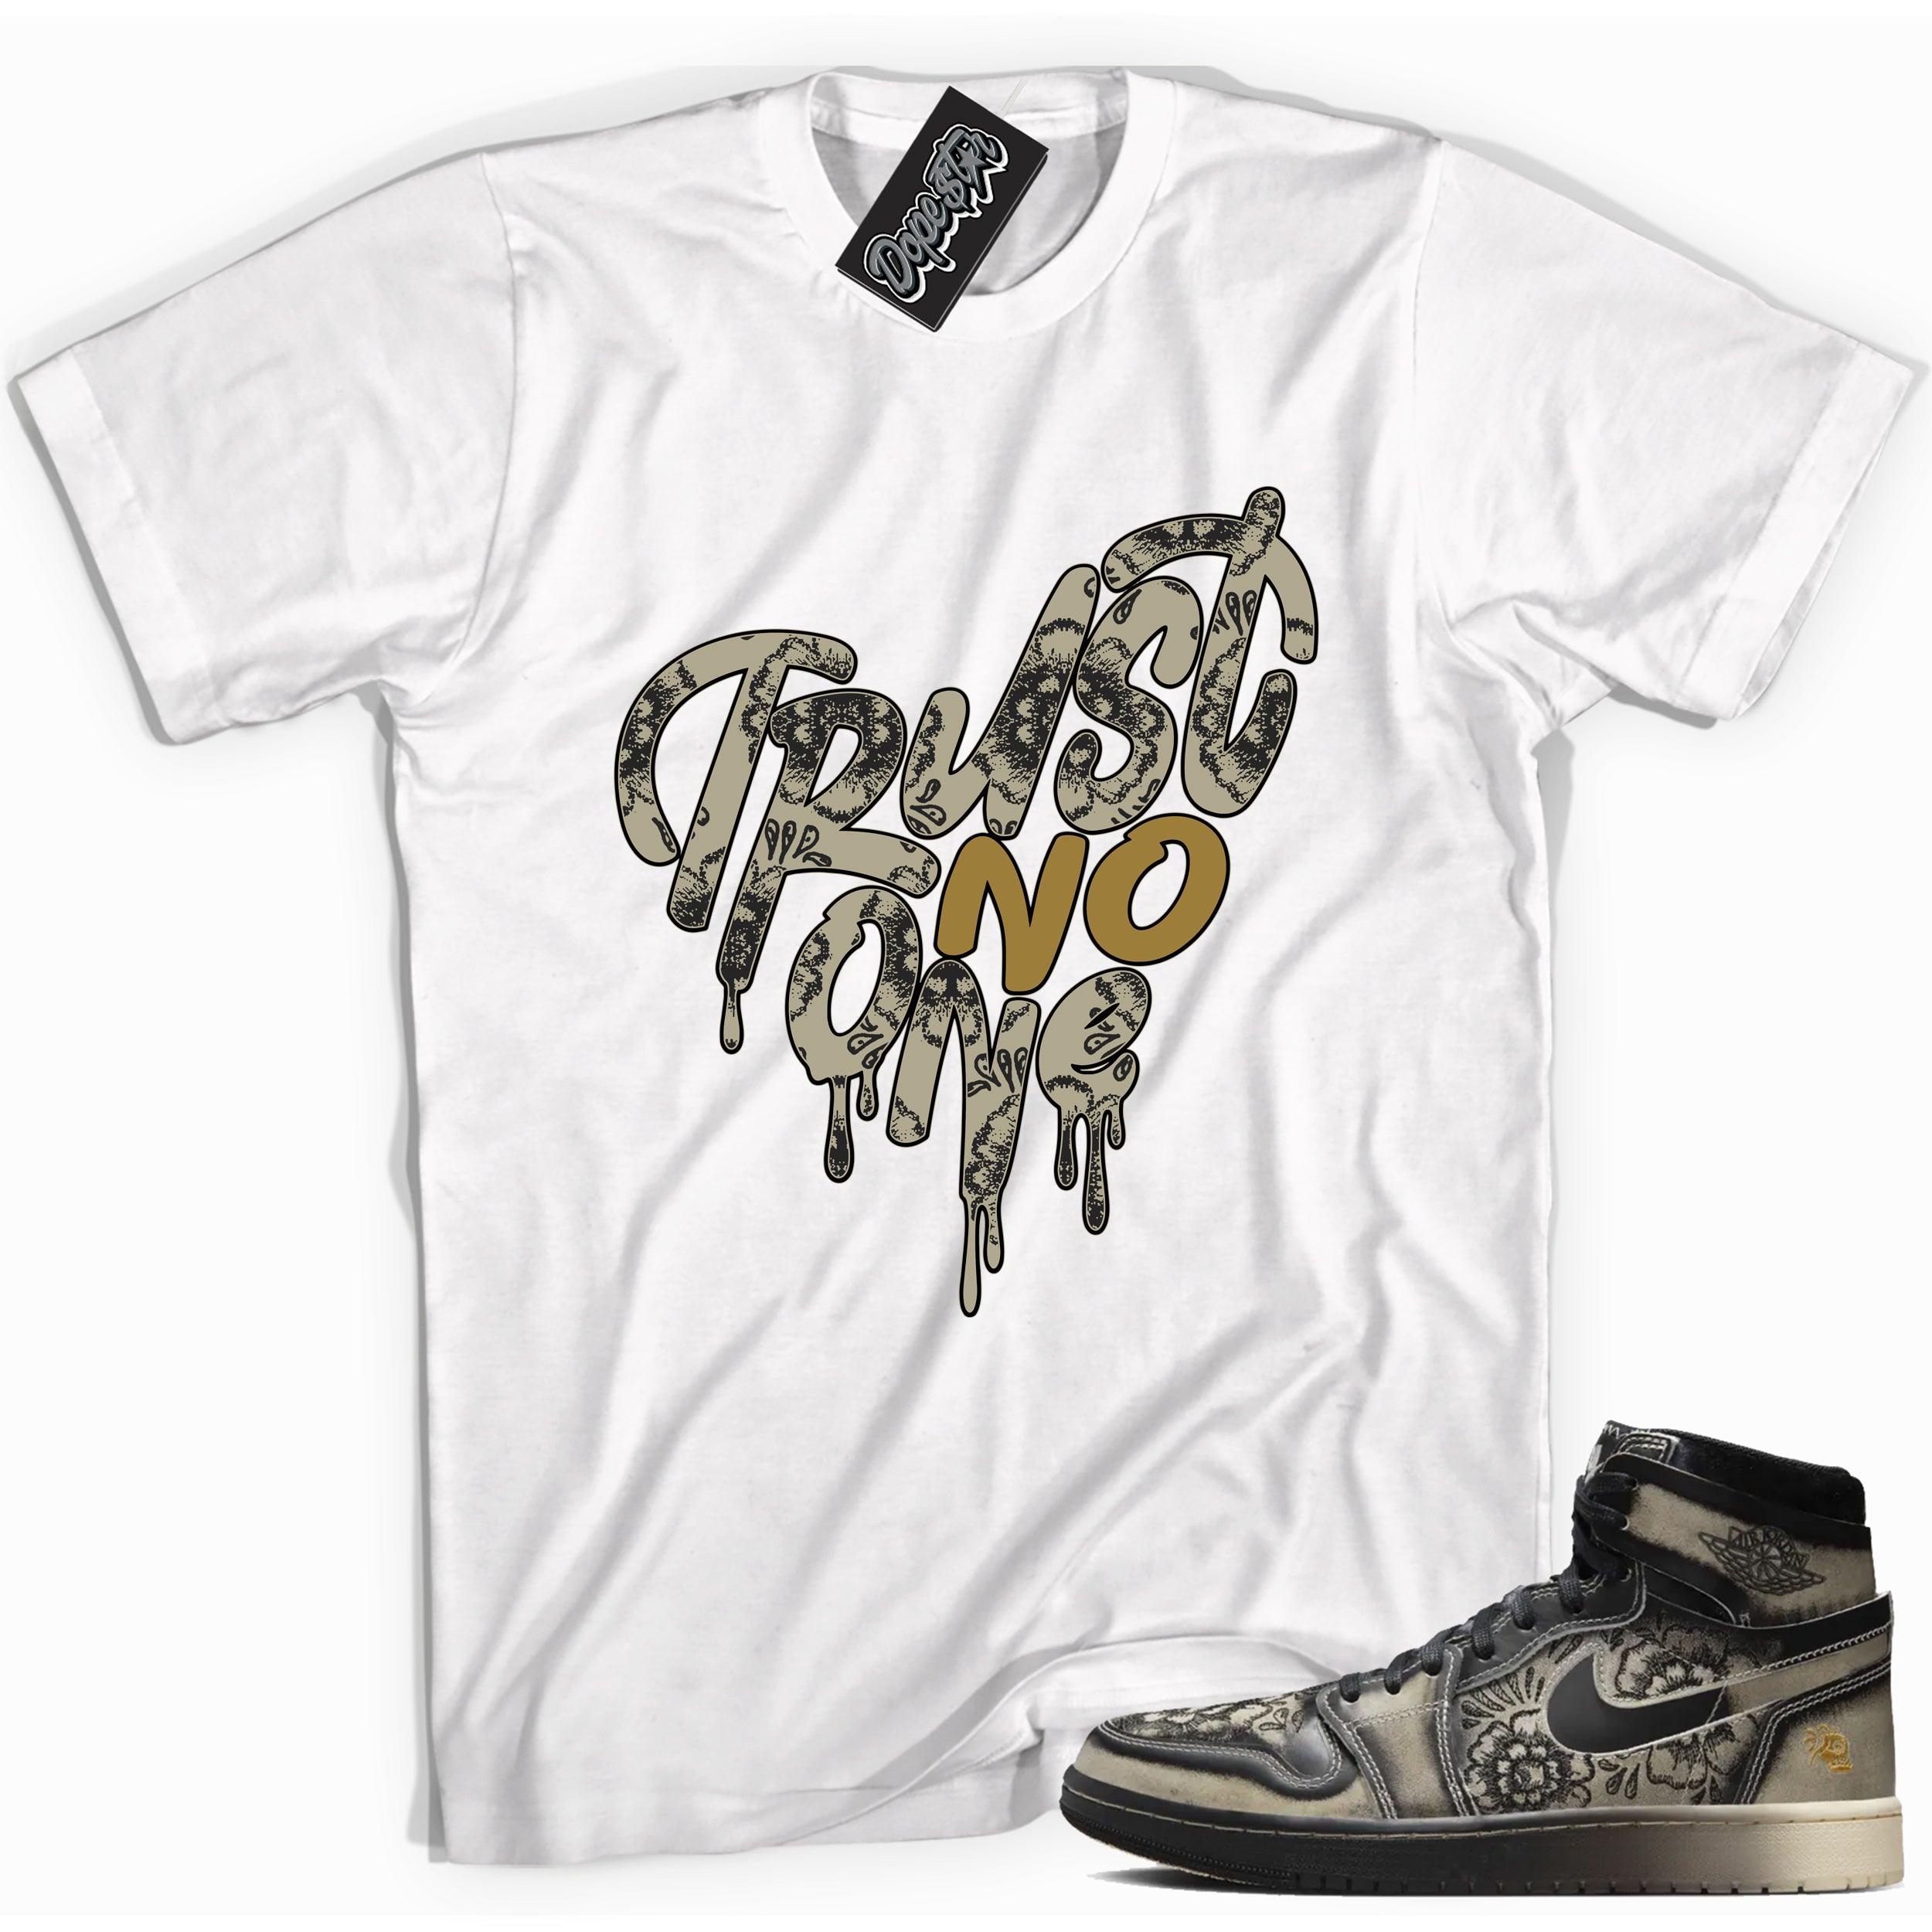 Cool White graphic tee with “ Trust No One Heart ” print, that perfectly matches Air Jordan 1 High Zoom Comfort 2 Dia de Muertos Black and Pale Ivory sneakers 